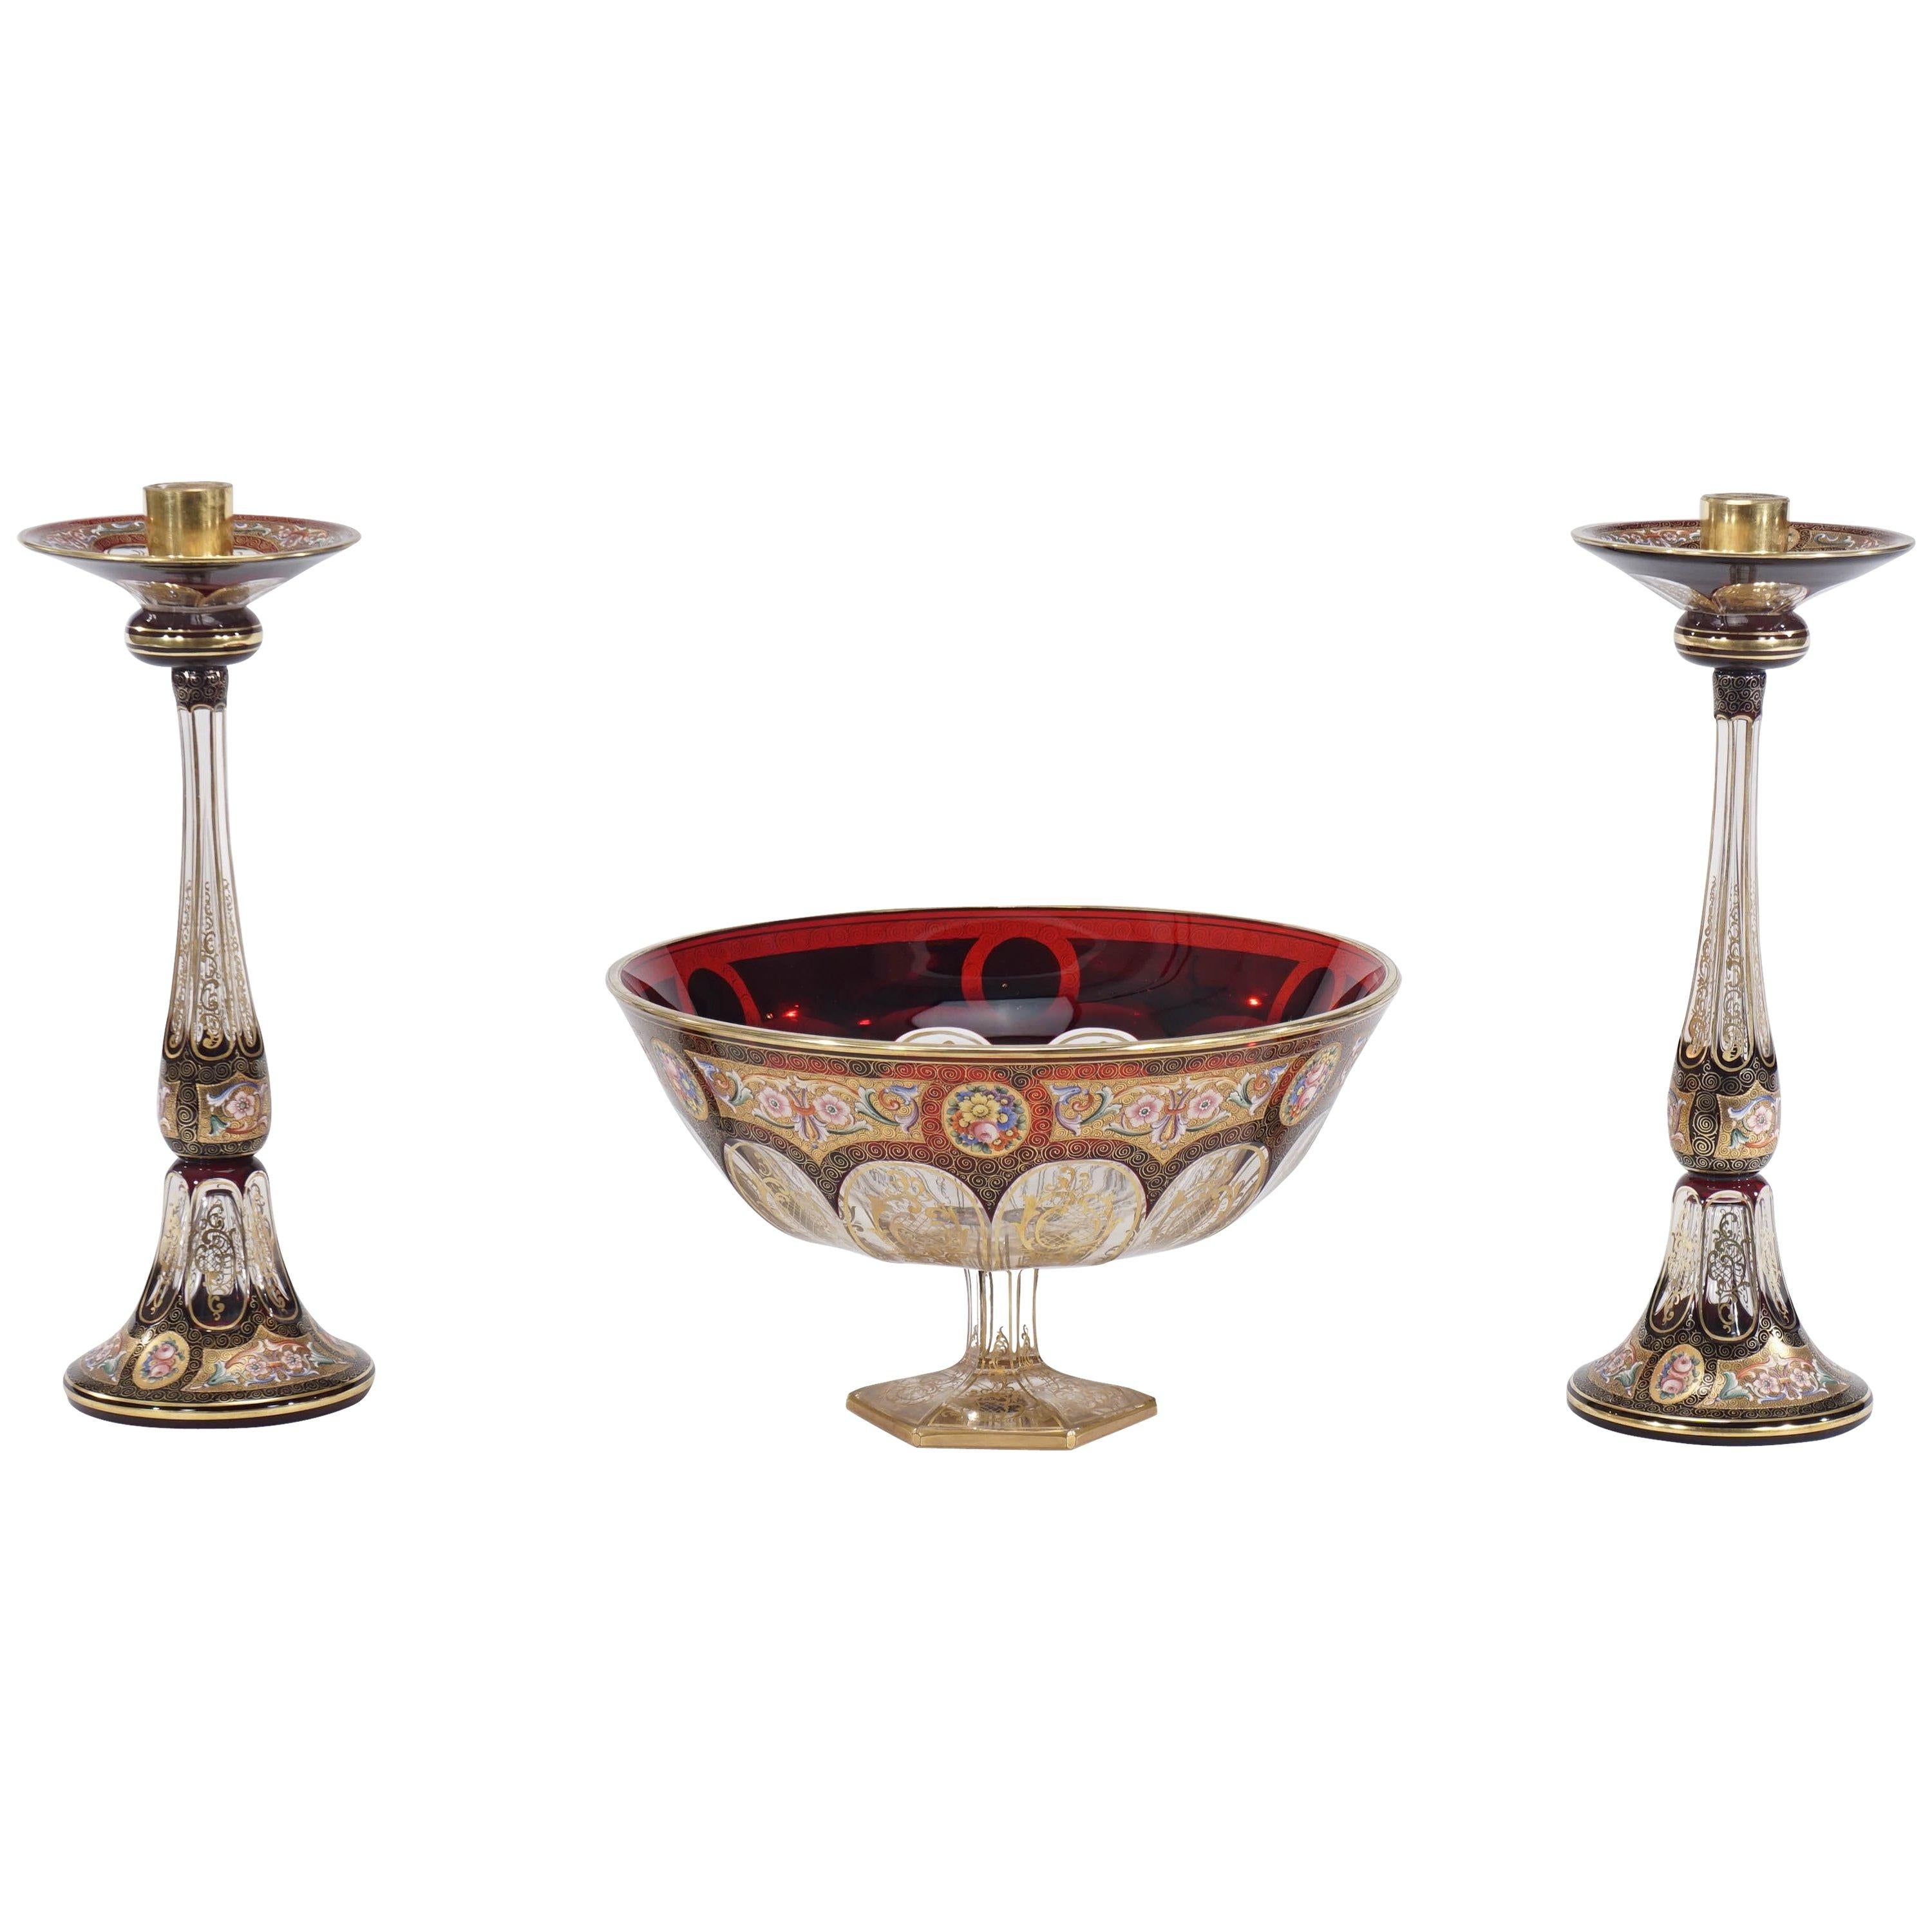 Moser Three-Piece Centrepiece in Ruby Red, Hand-Painted Enamel and Gold